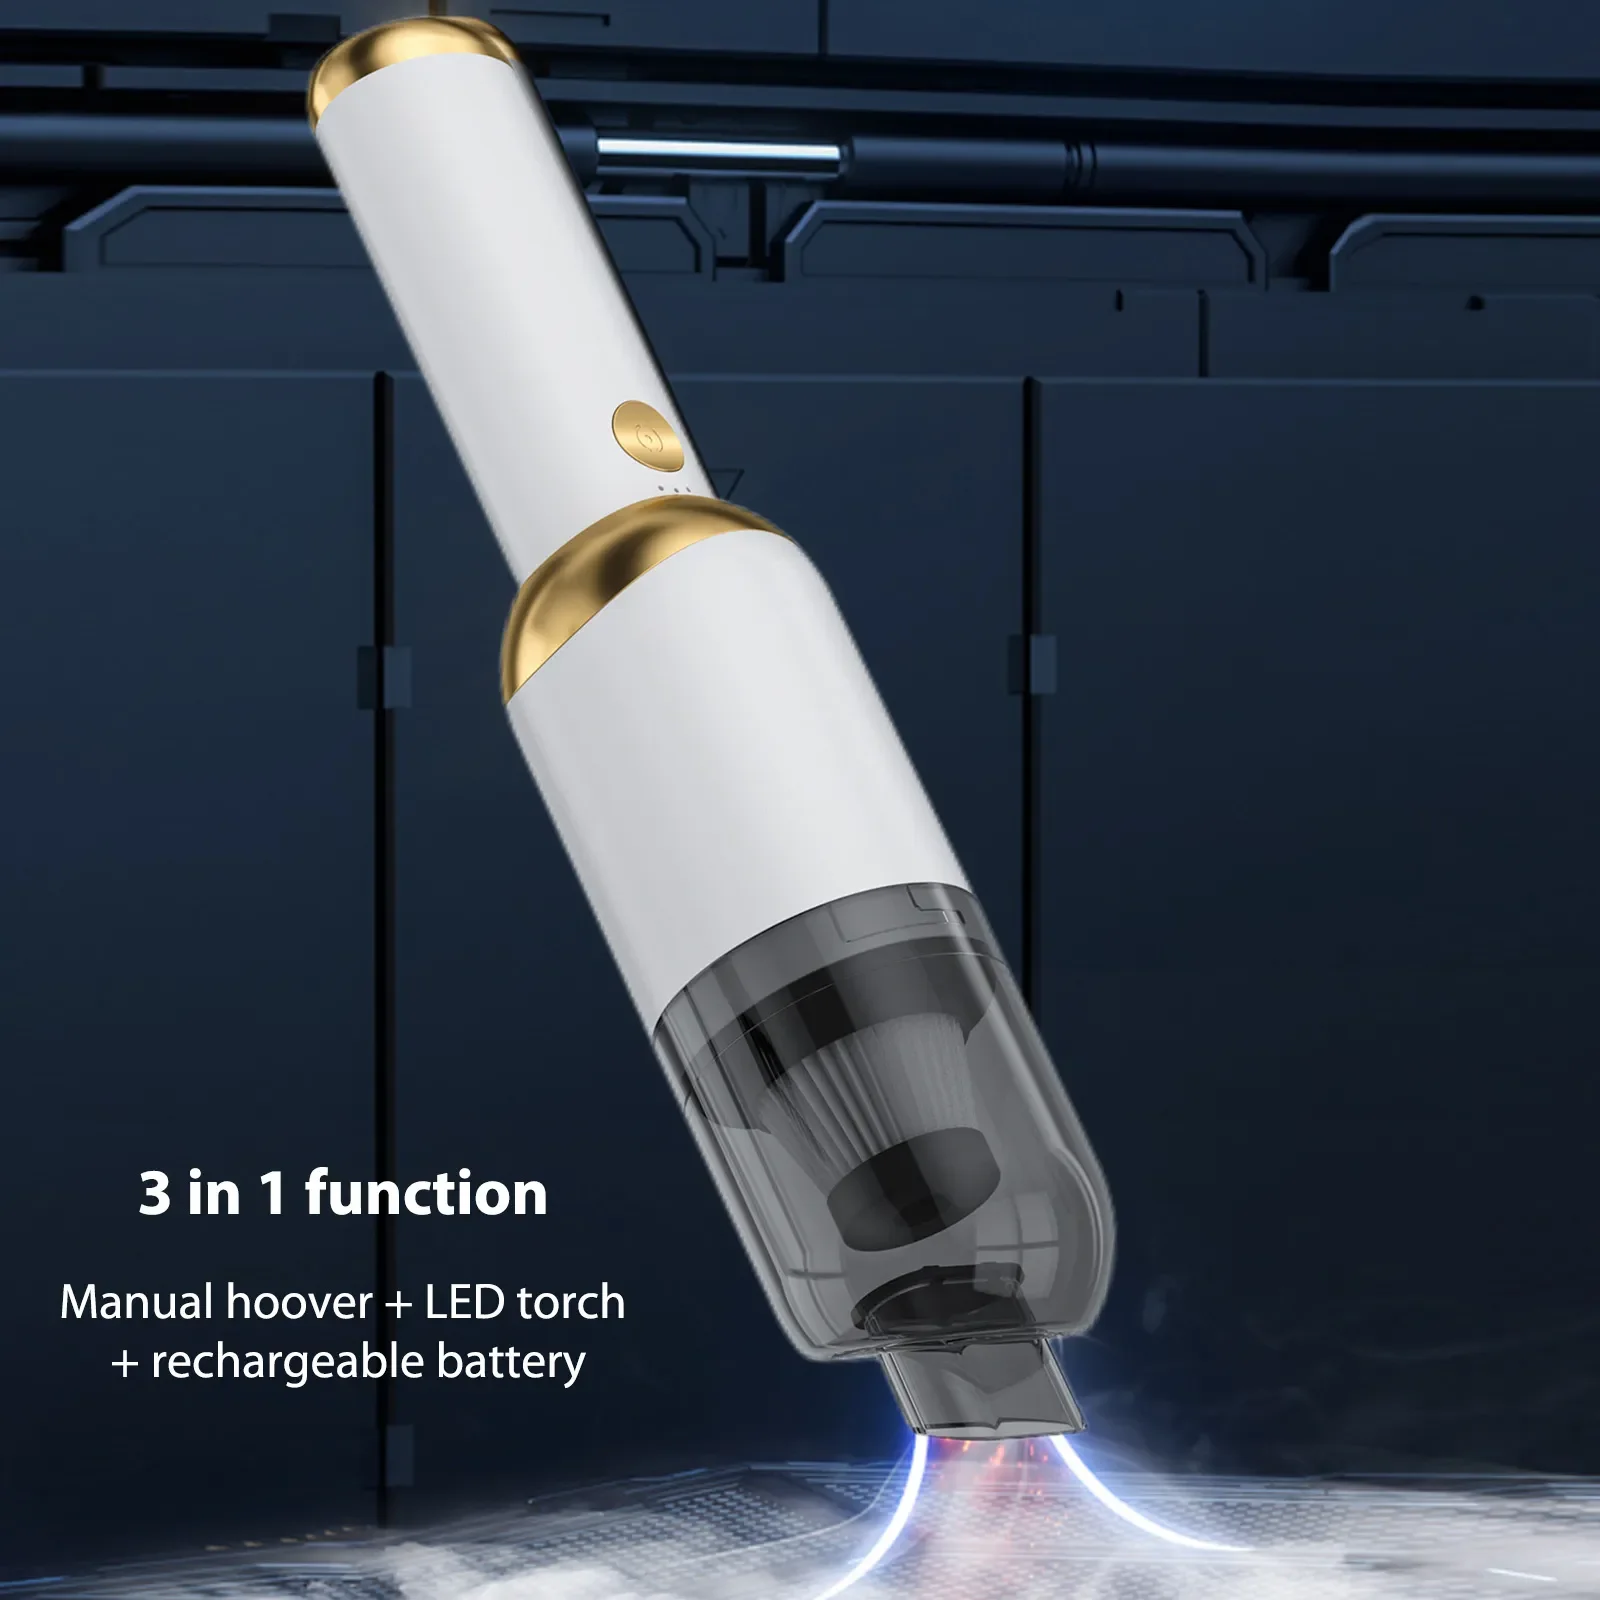 

in 1 Cordless Vacuum Cleaner 6000mAh 120w Powerful Portable Wireless Car Vacuum Cleaner with Flashlight with POWER Bank forCar